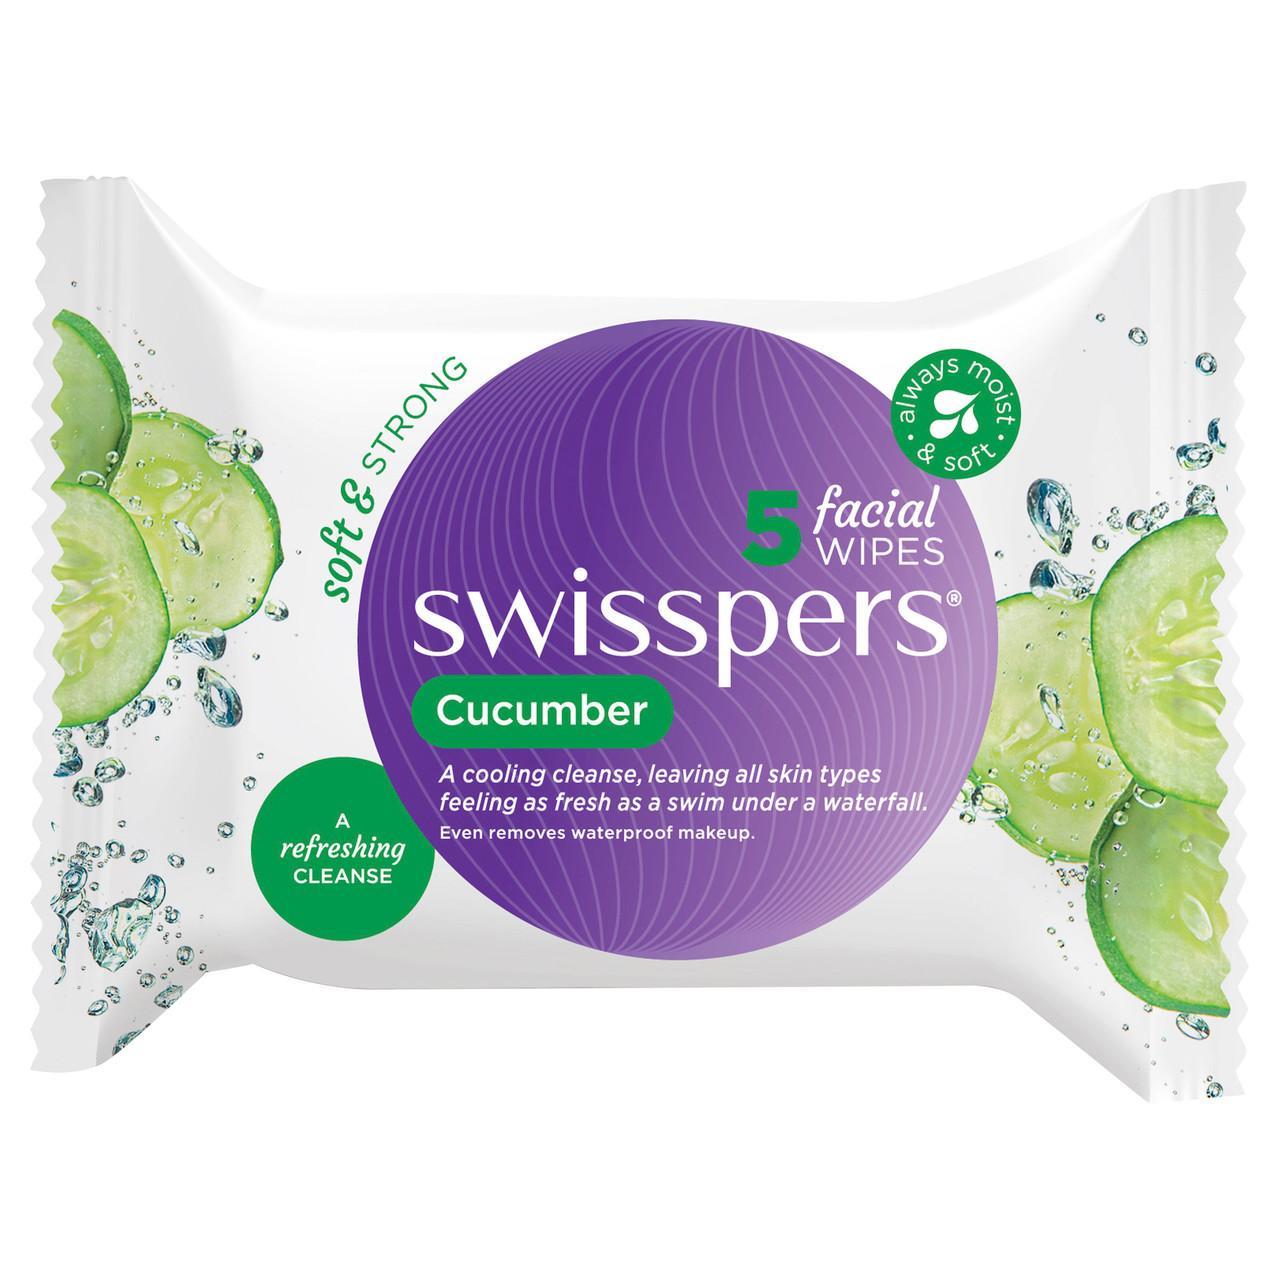 Swisspers Cucumber Facial Wipes 5 pack